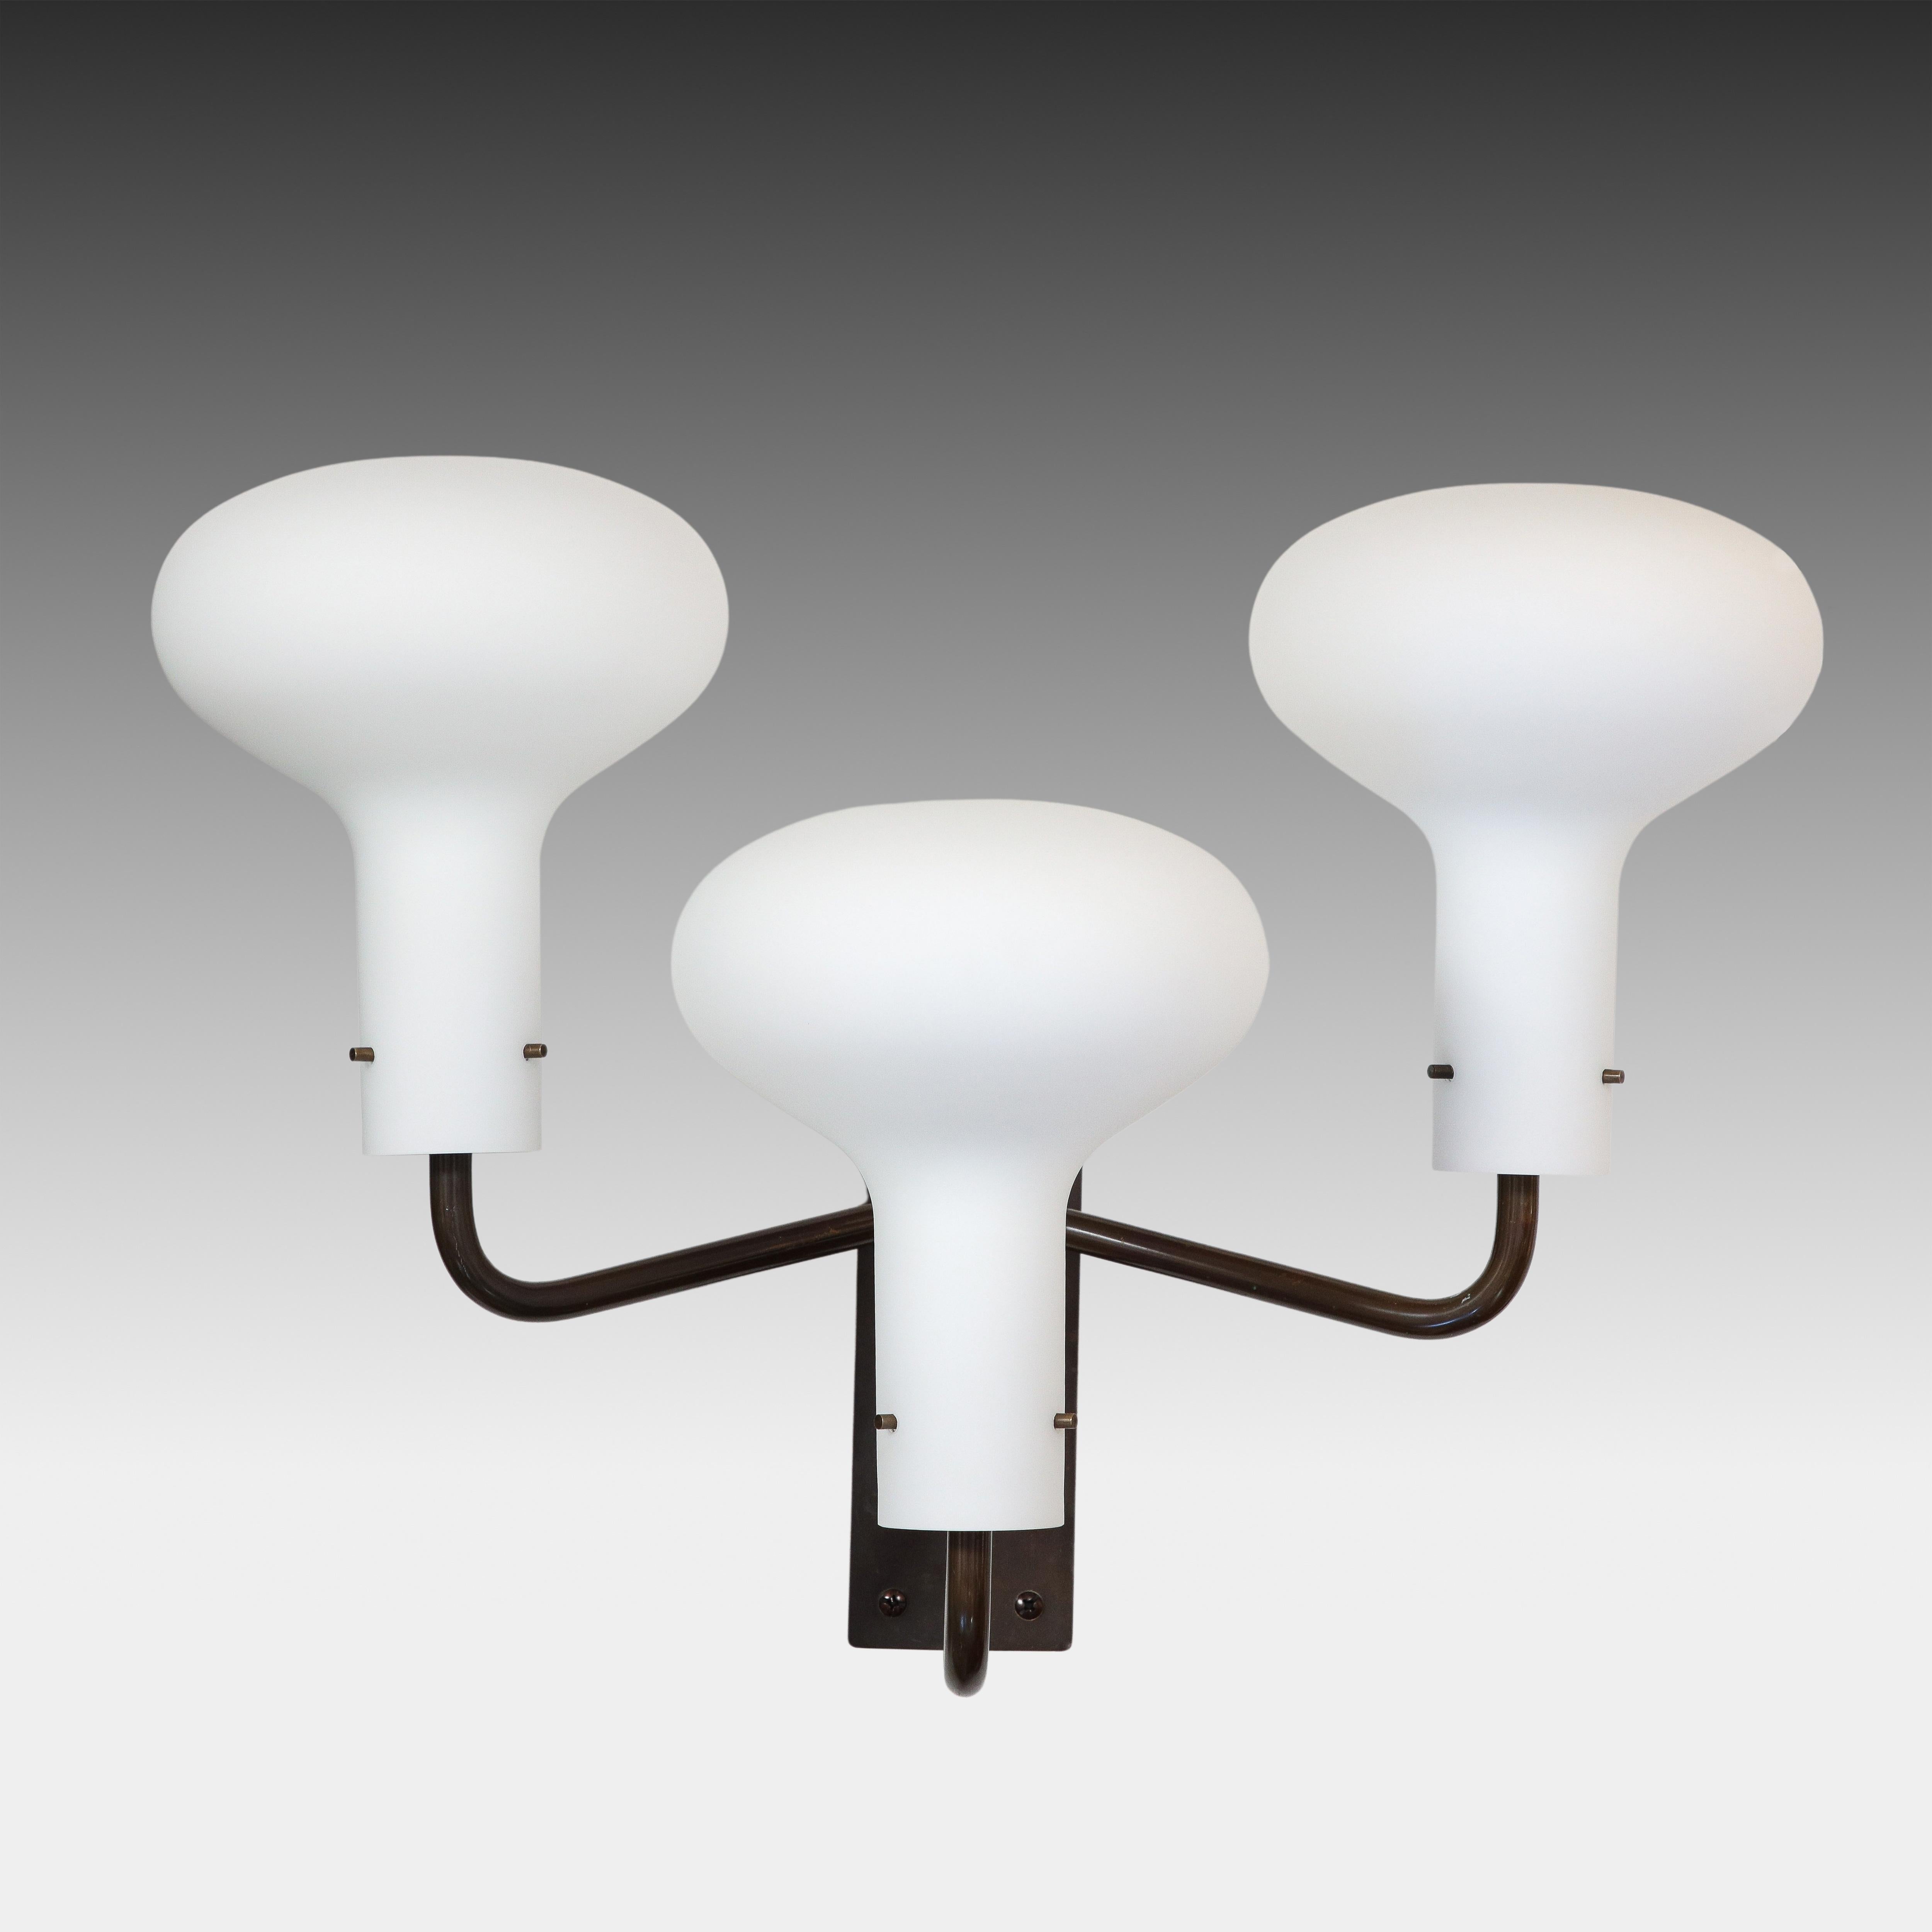 Mid-20th Century Ignazio Gardella for Azucena Pair of Wall Lights Model LP12, Italy, 1950s For Sale